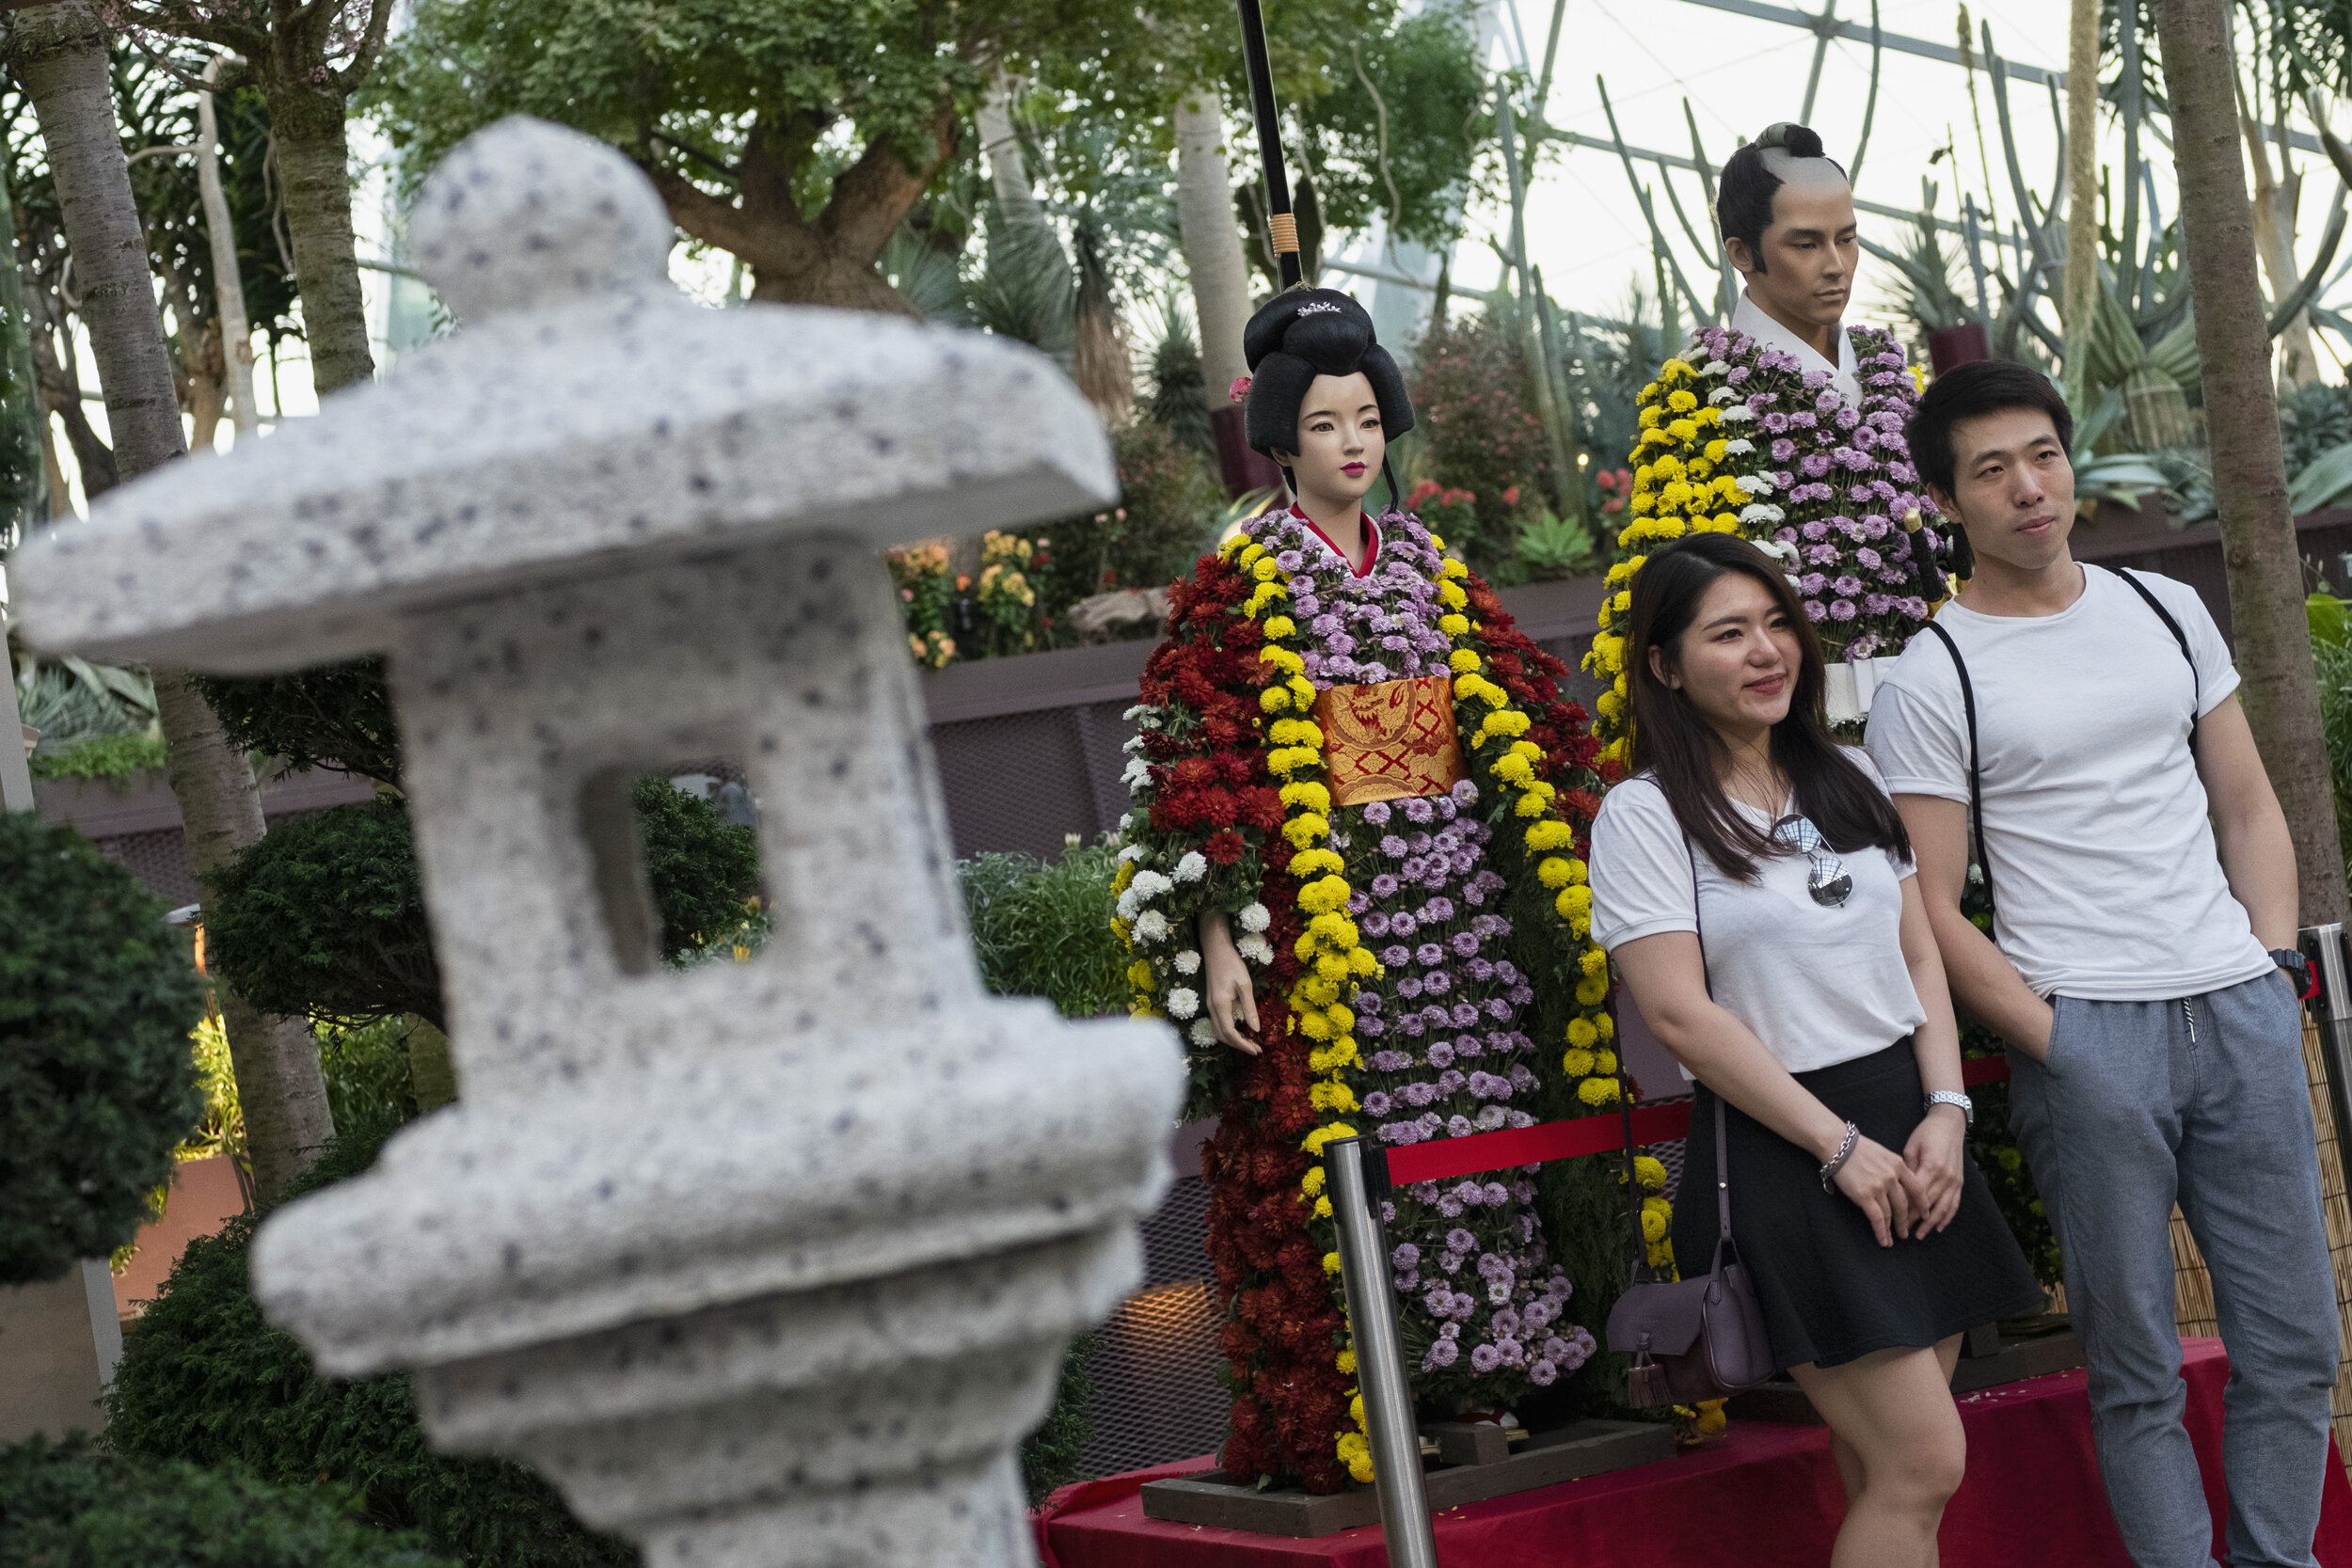  Visitors pose in front of mannequins dressed in chrysanthemums in the likeness of Japanese traditional attire during the Sakura Matsuri floral display at Gardens by the Bay in Singapore 